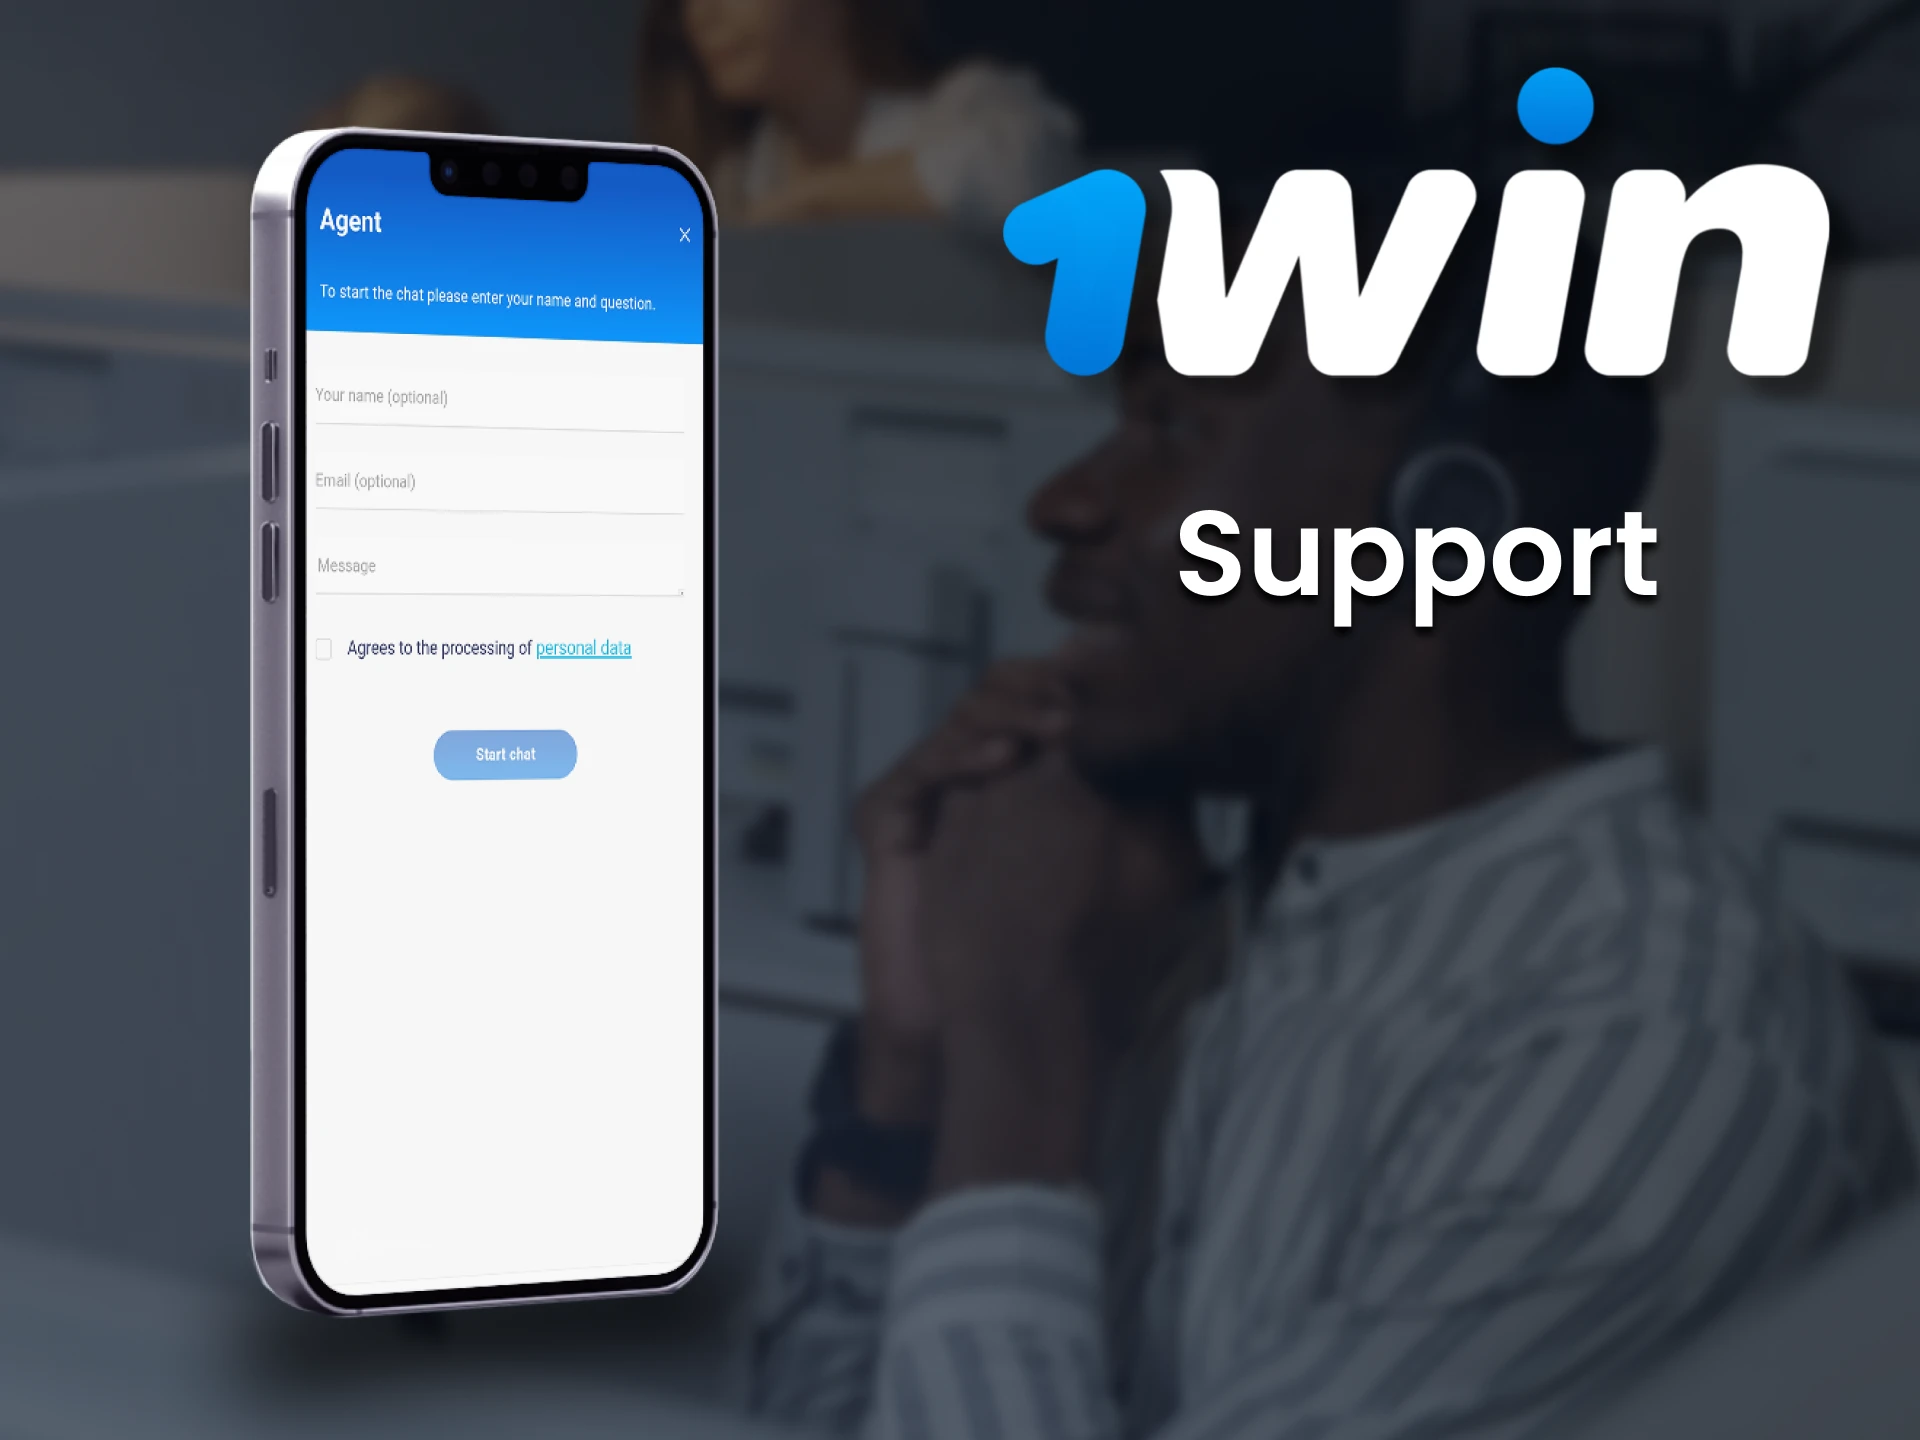 You will always find help from the support team in the 1win app.